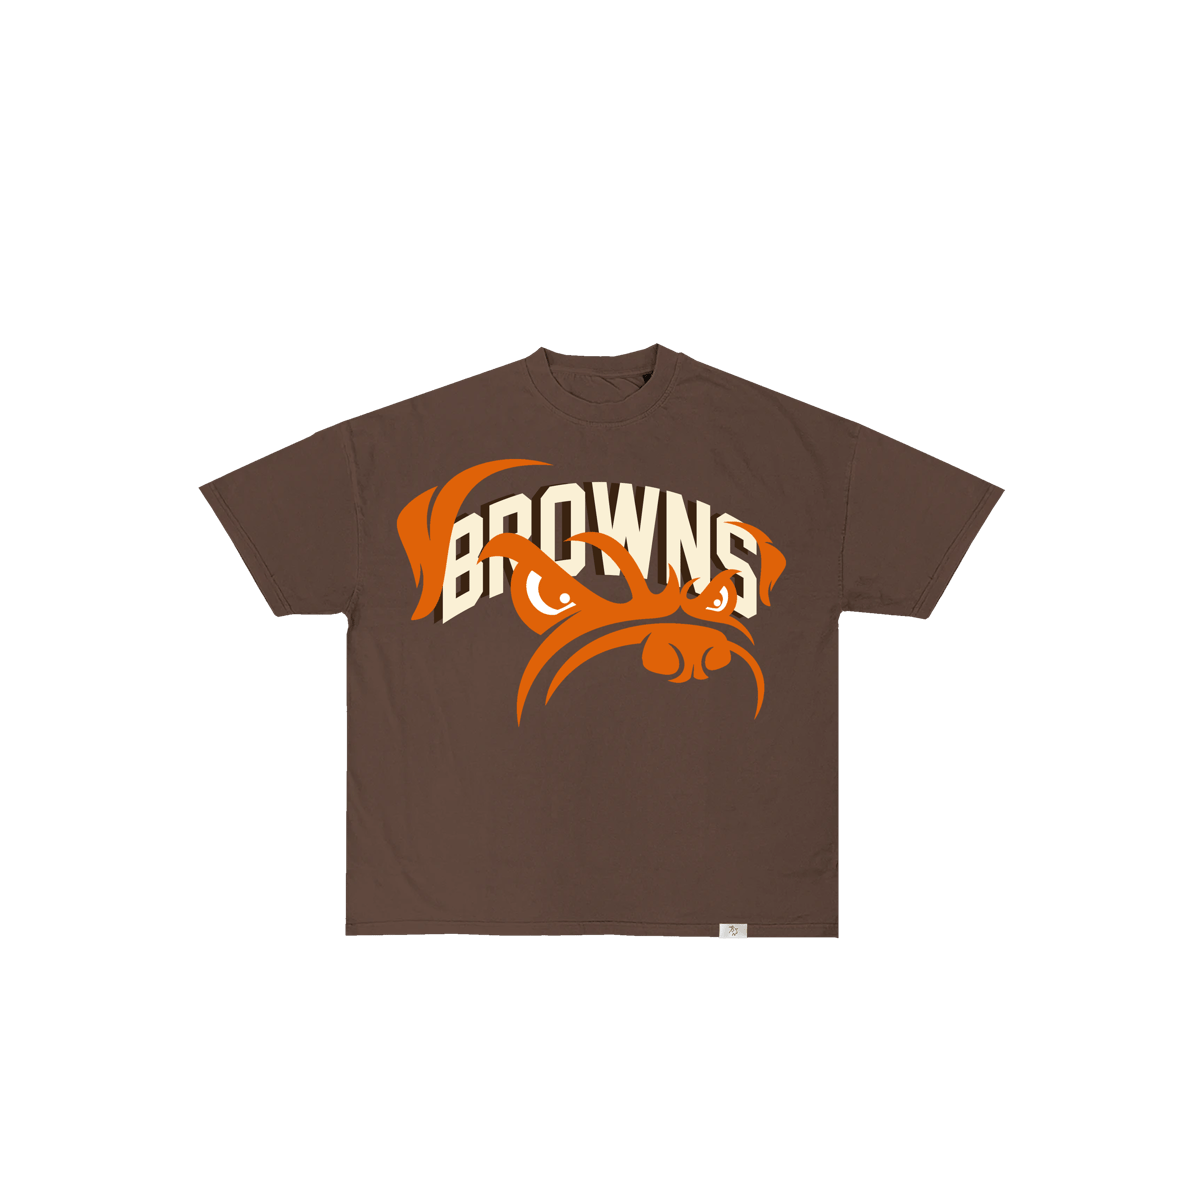 CLEVELAND BROWNS "DAWG" TEE